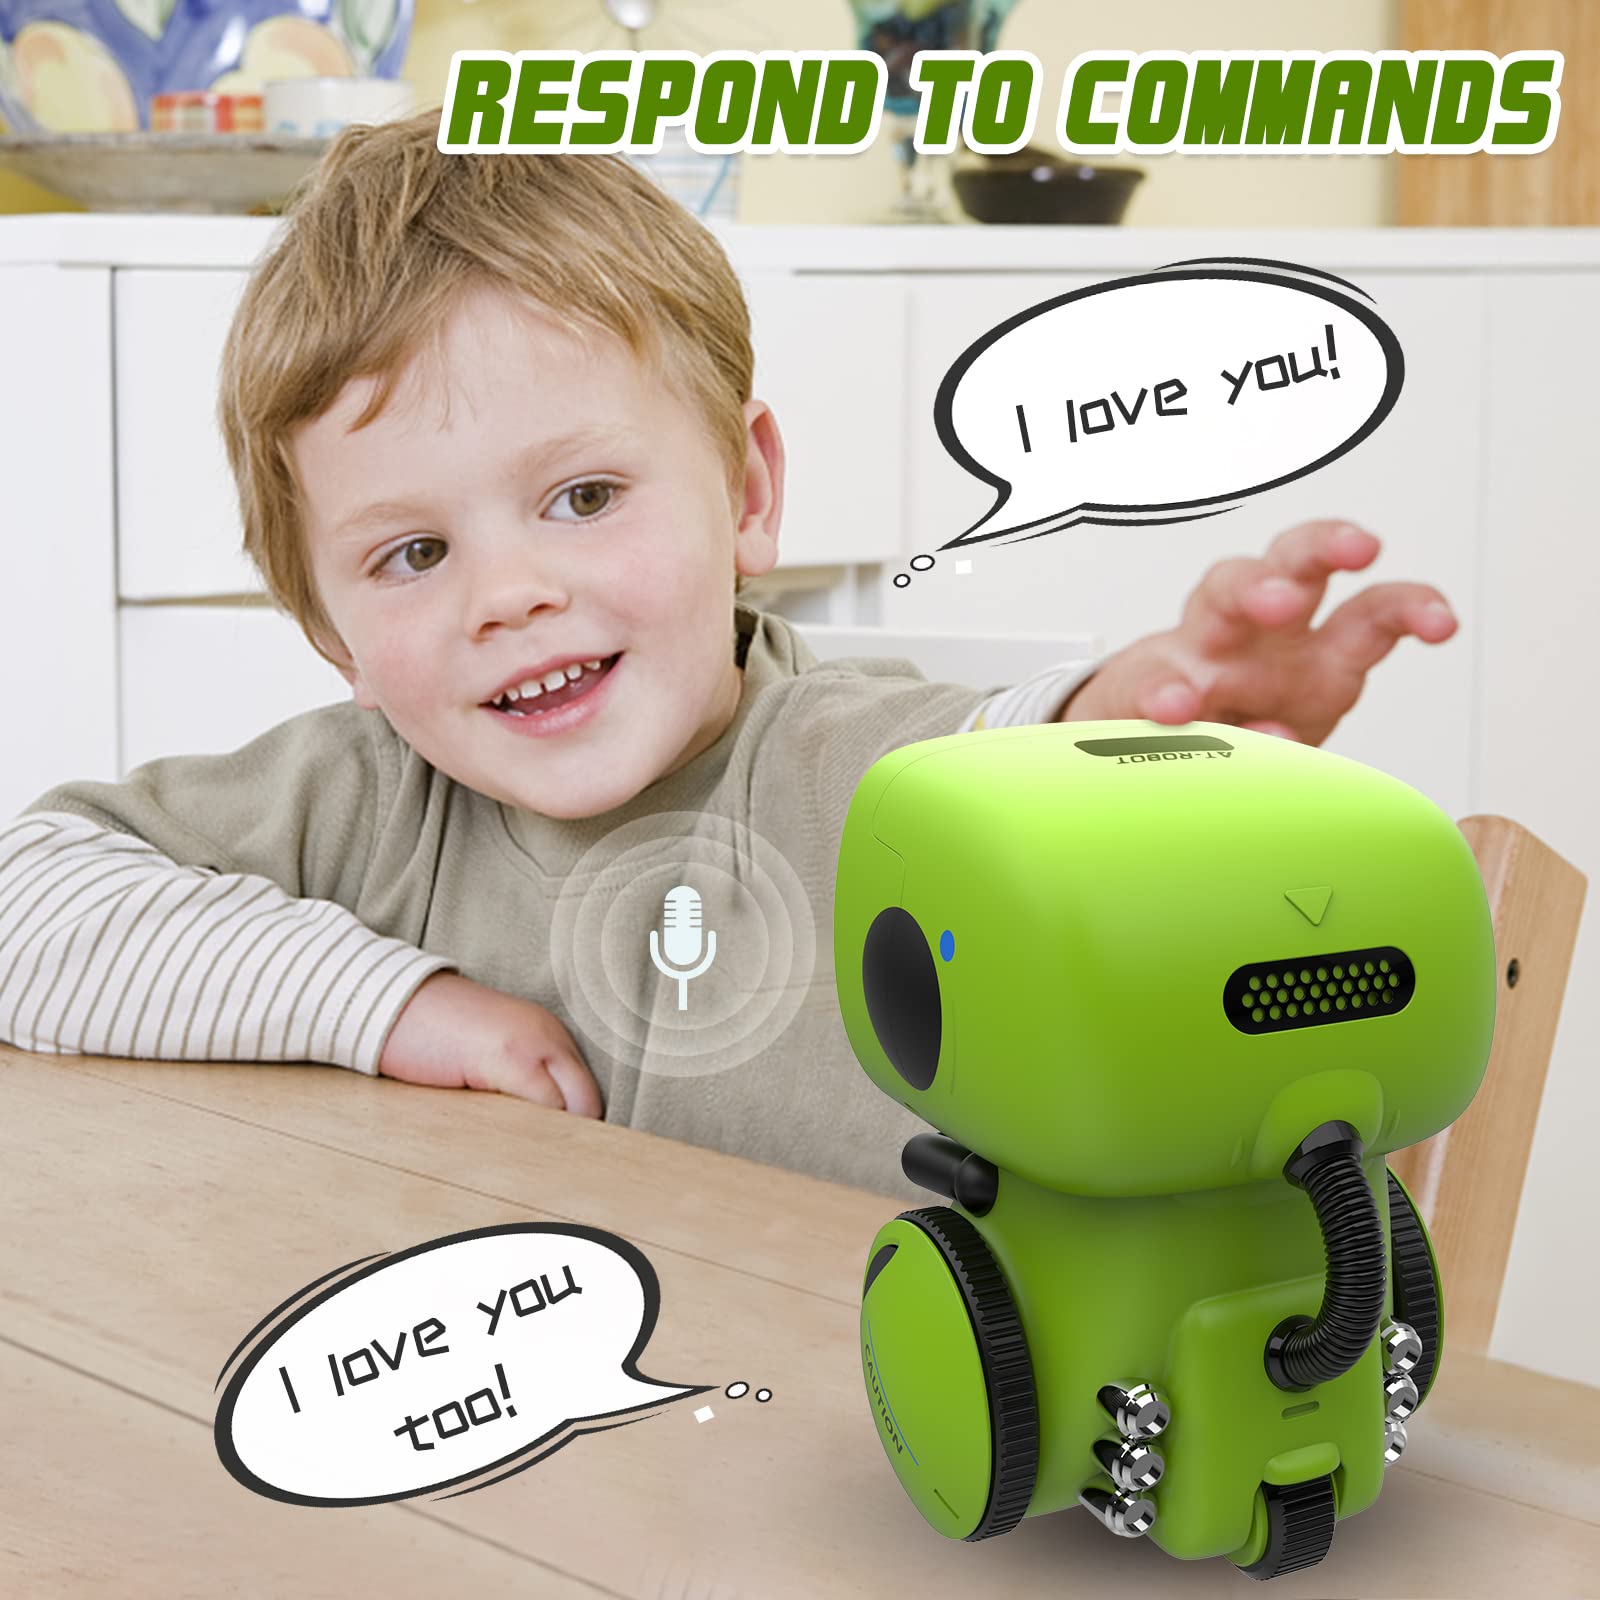 GILOBABY Kids Robot Toys, Interactive Robot Companion Smart Talking Robot with Voice Control Touch Sensor, Dancing, Singing, Recording, Repeat, Birthday Gifts for Boys Ages 3+ Years (Green)